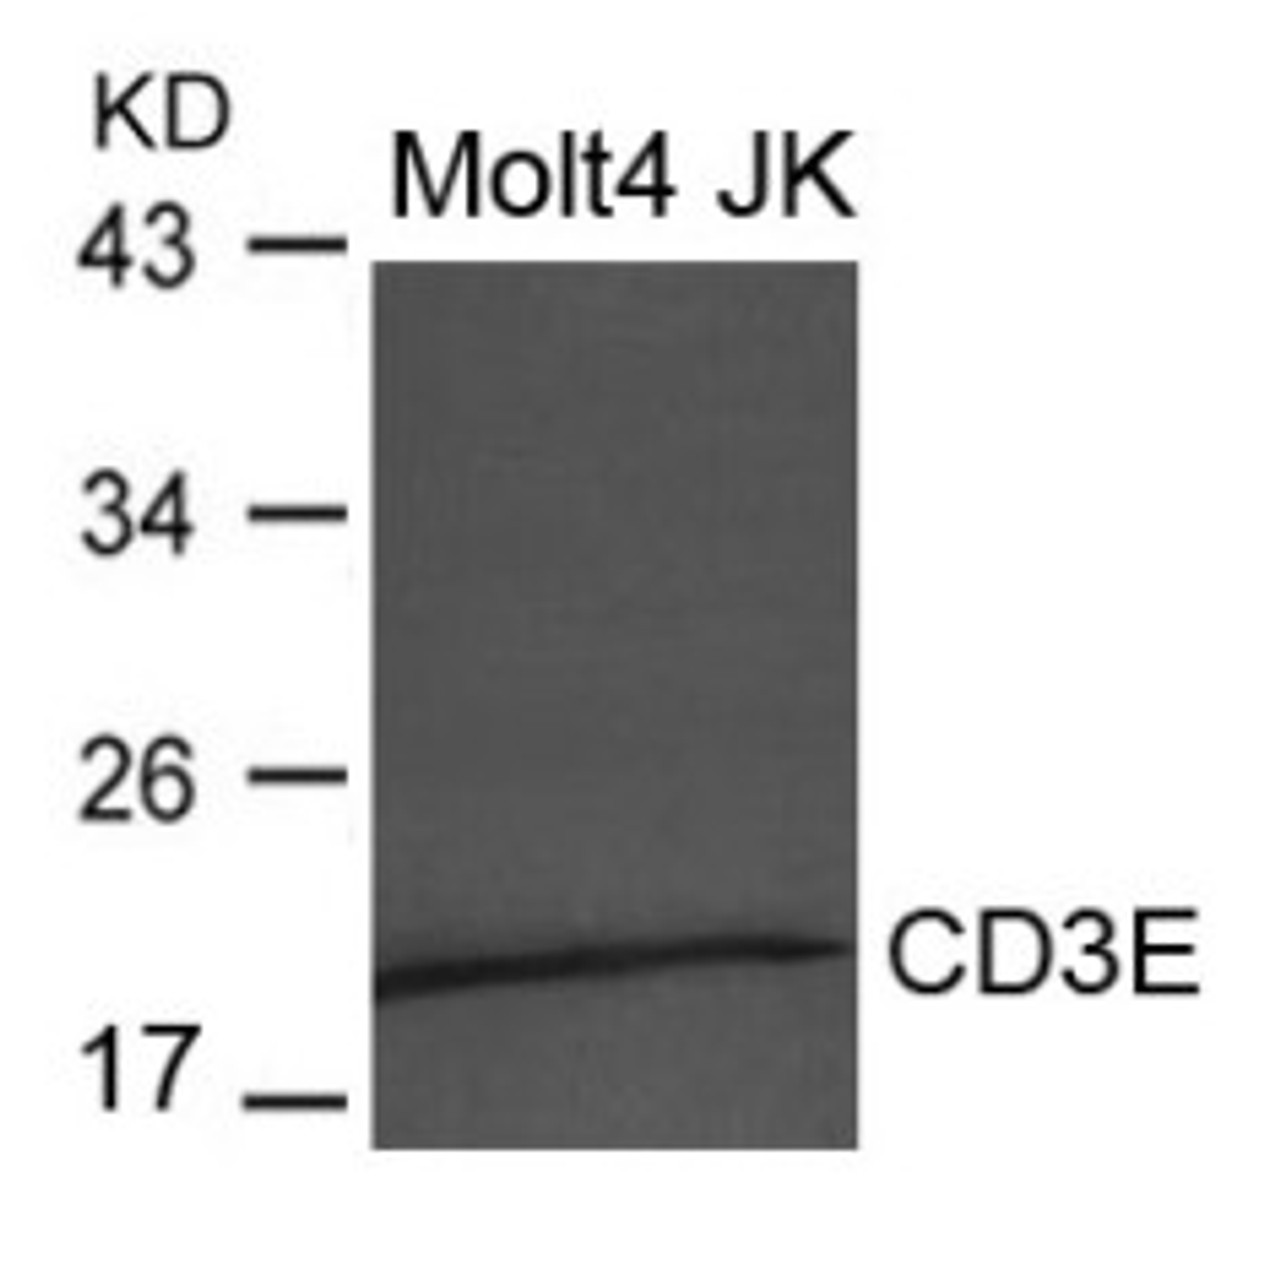 Western blot analysis of extract from Molt4 and JK cells using CD3E Antibody.